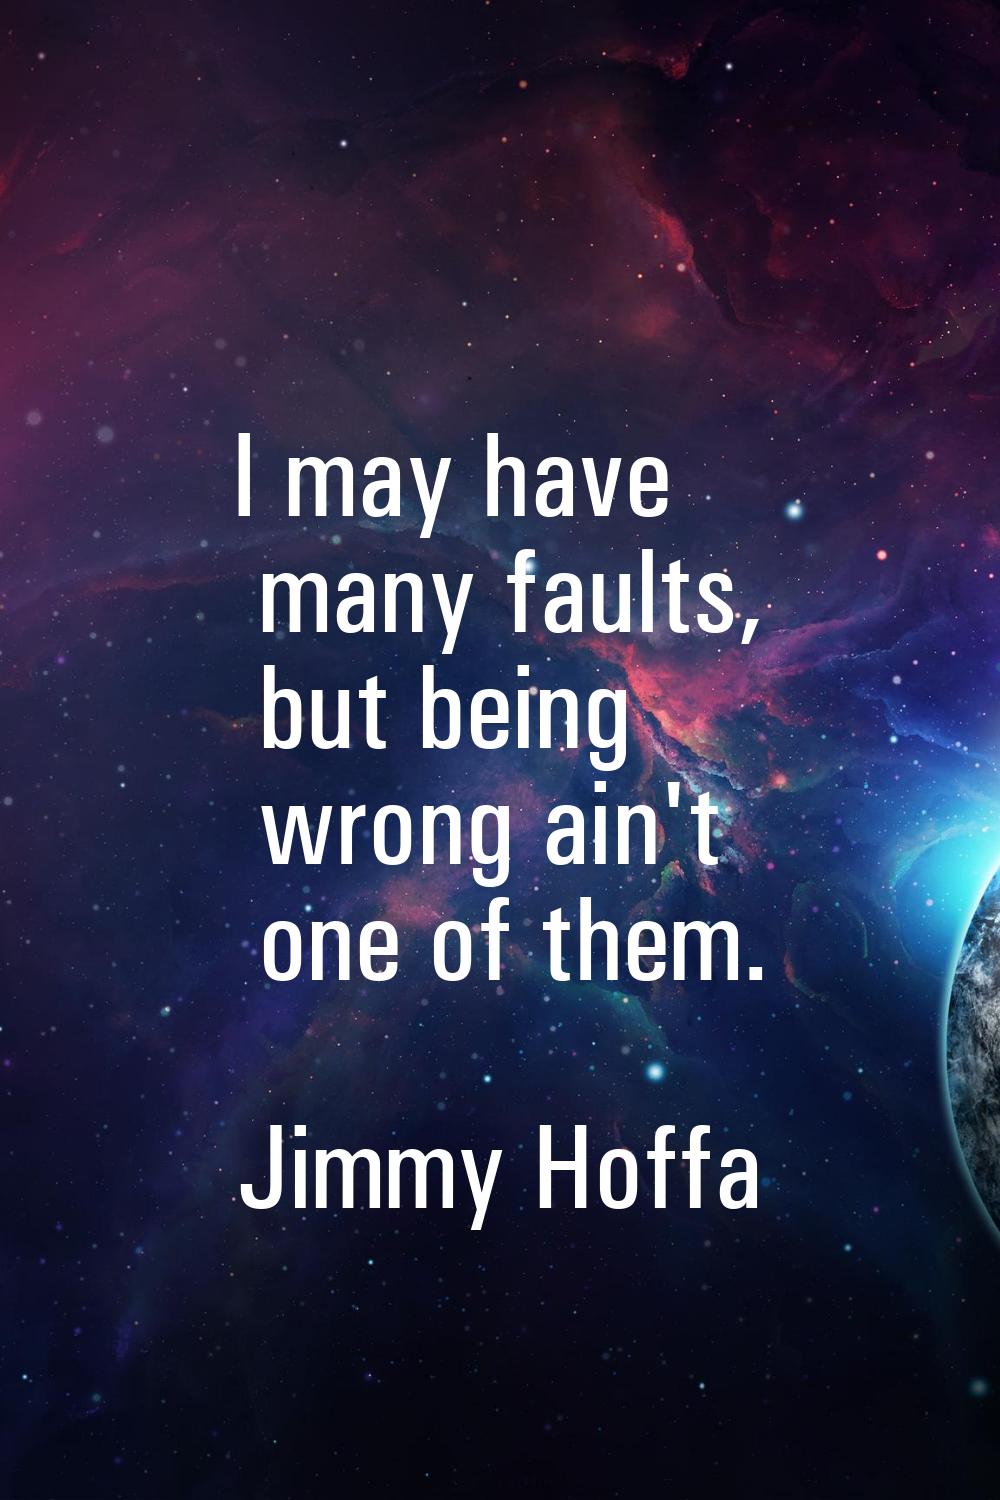 I may have many faults, but being wrong ain't one of them.